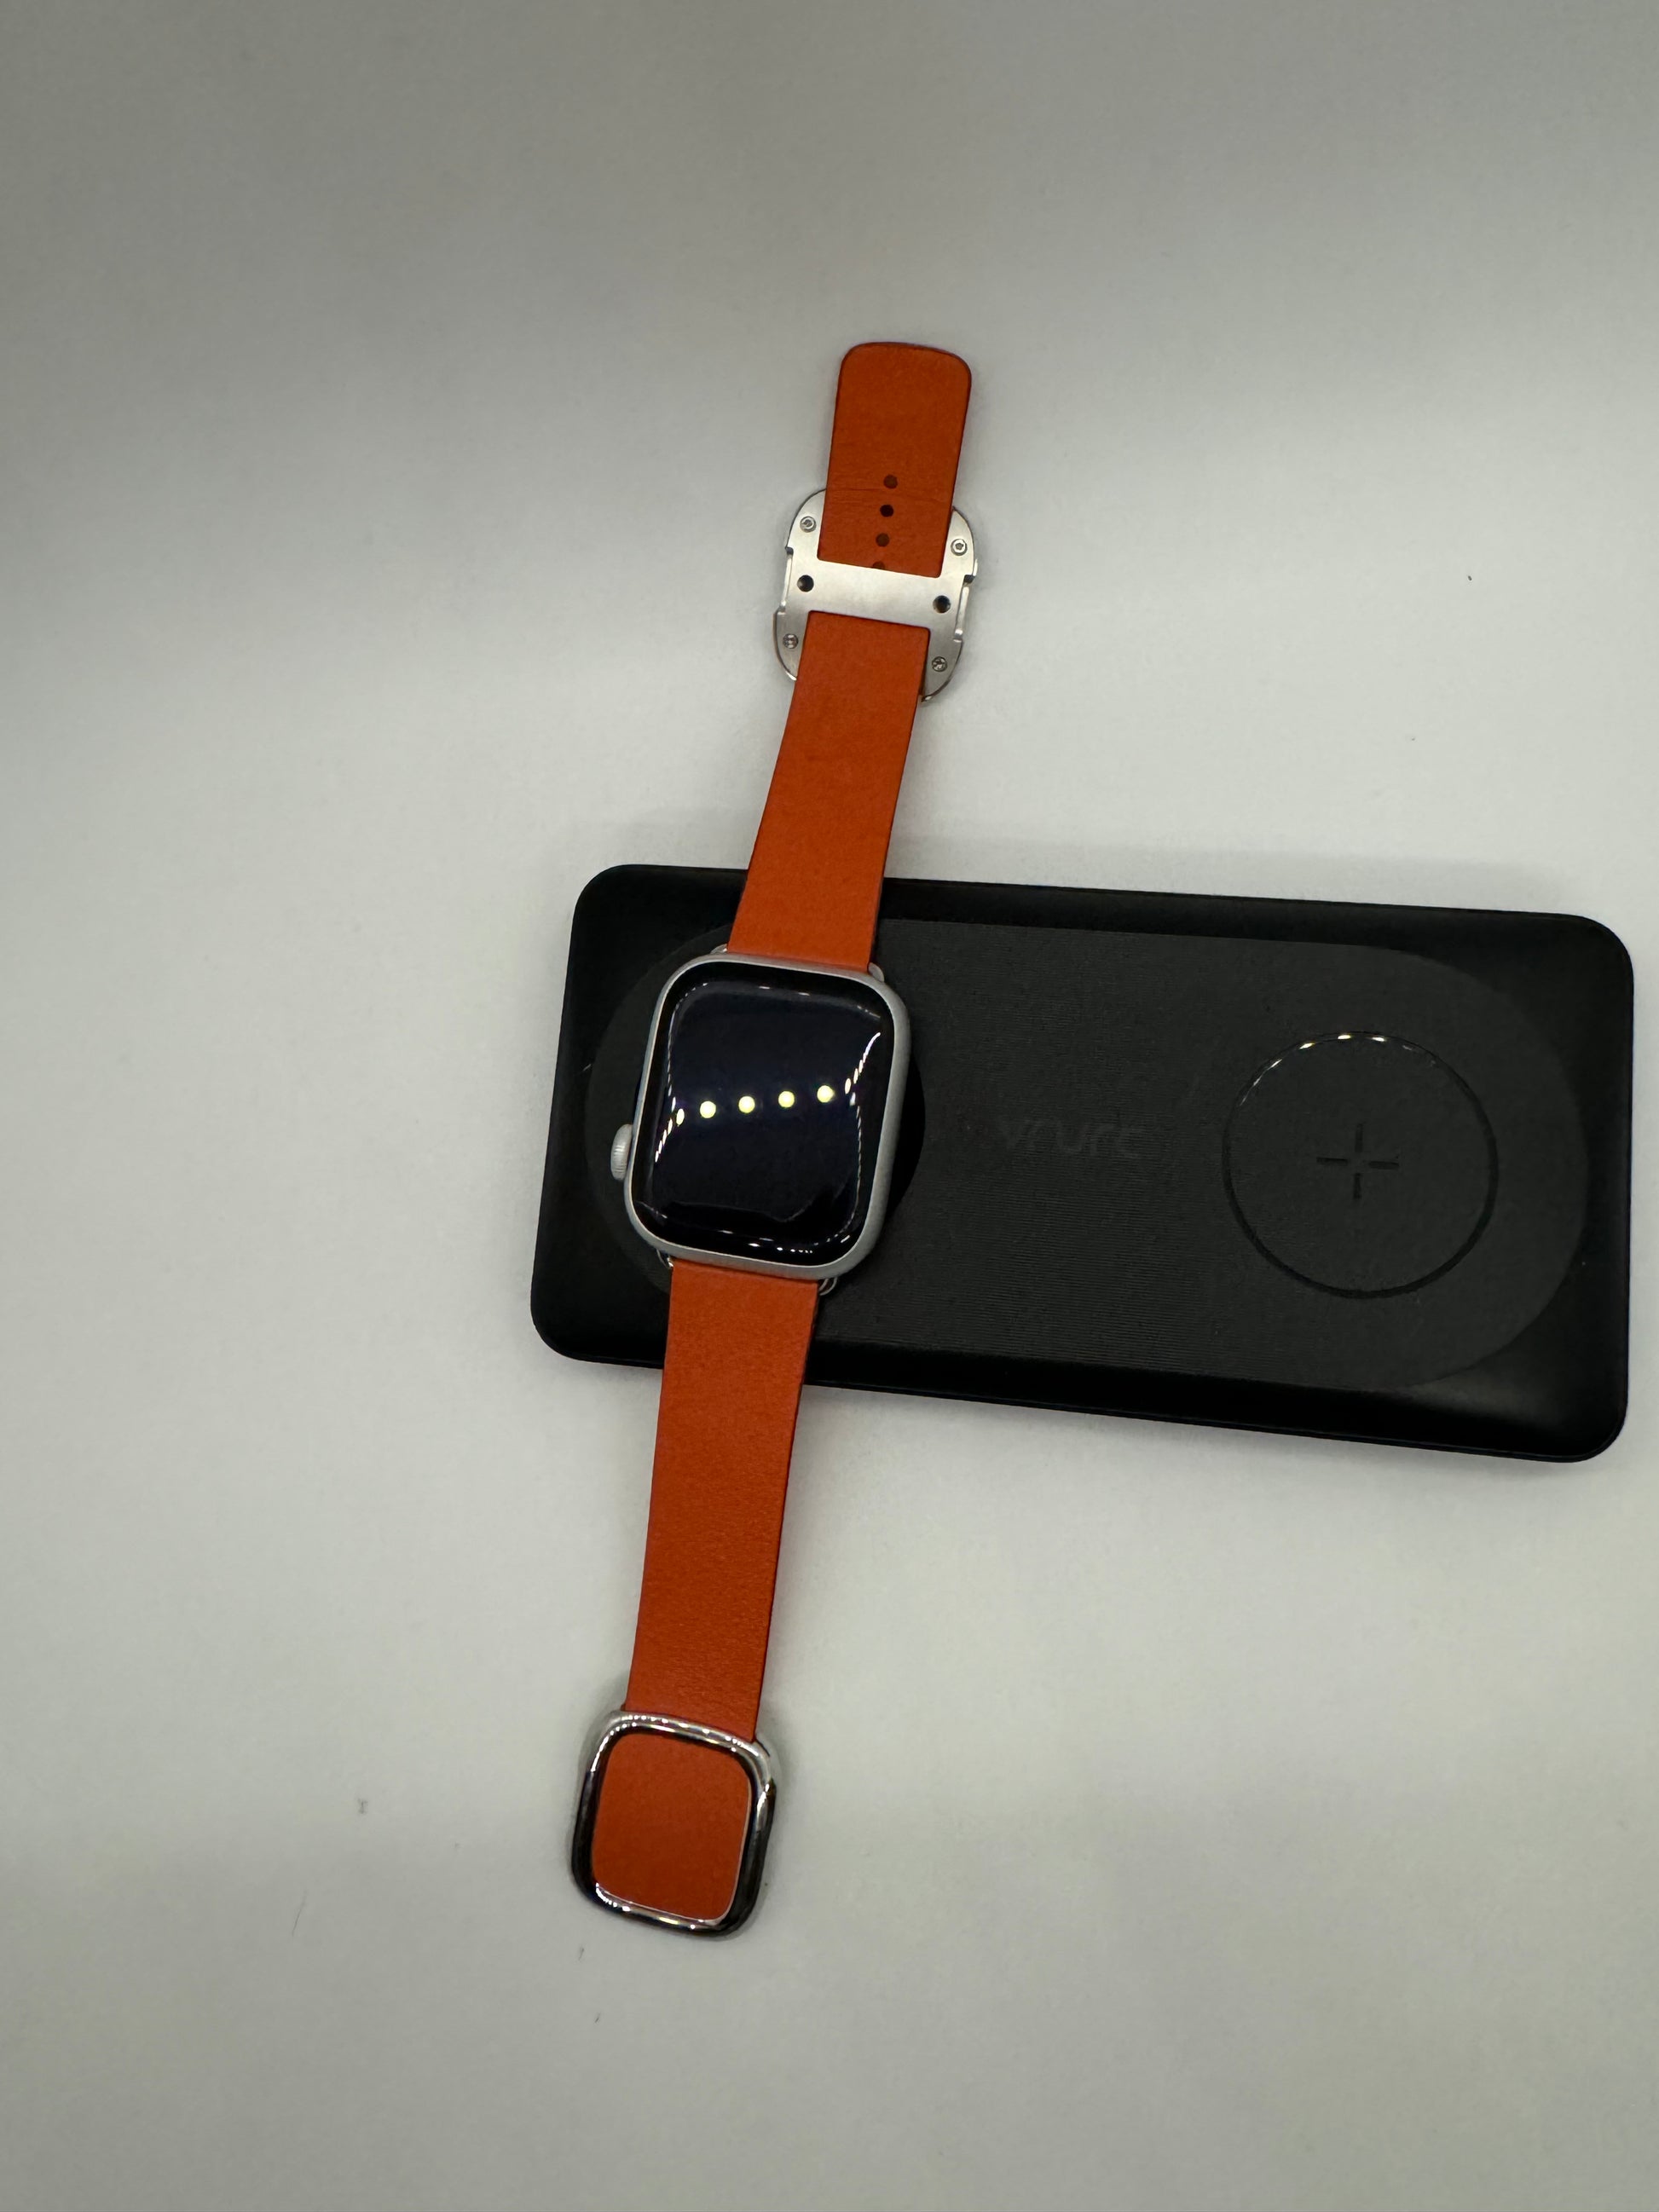 The picture shows a smartwatch with an orange leather strap. The watch face is square with rounded corners and appears to be turned off or in sleep mode as the screen is black. The strap has a silver buckle and there are two loops to secure the strap. The watch is placed on top of a black rectangular object that seems to be a wireless charger. The charger has a plus sign on the top right corner. The background of the picture is plain white.